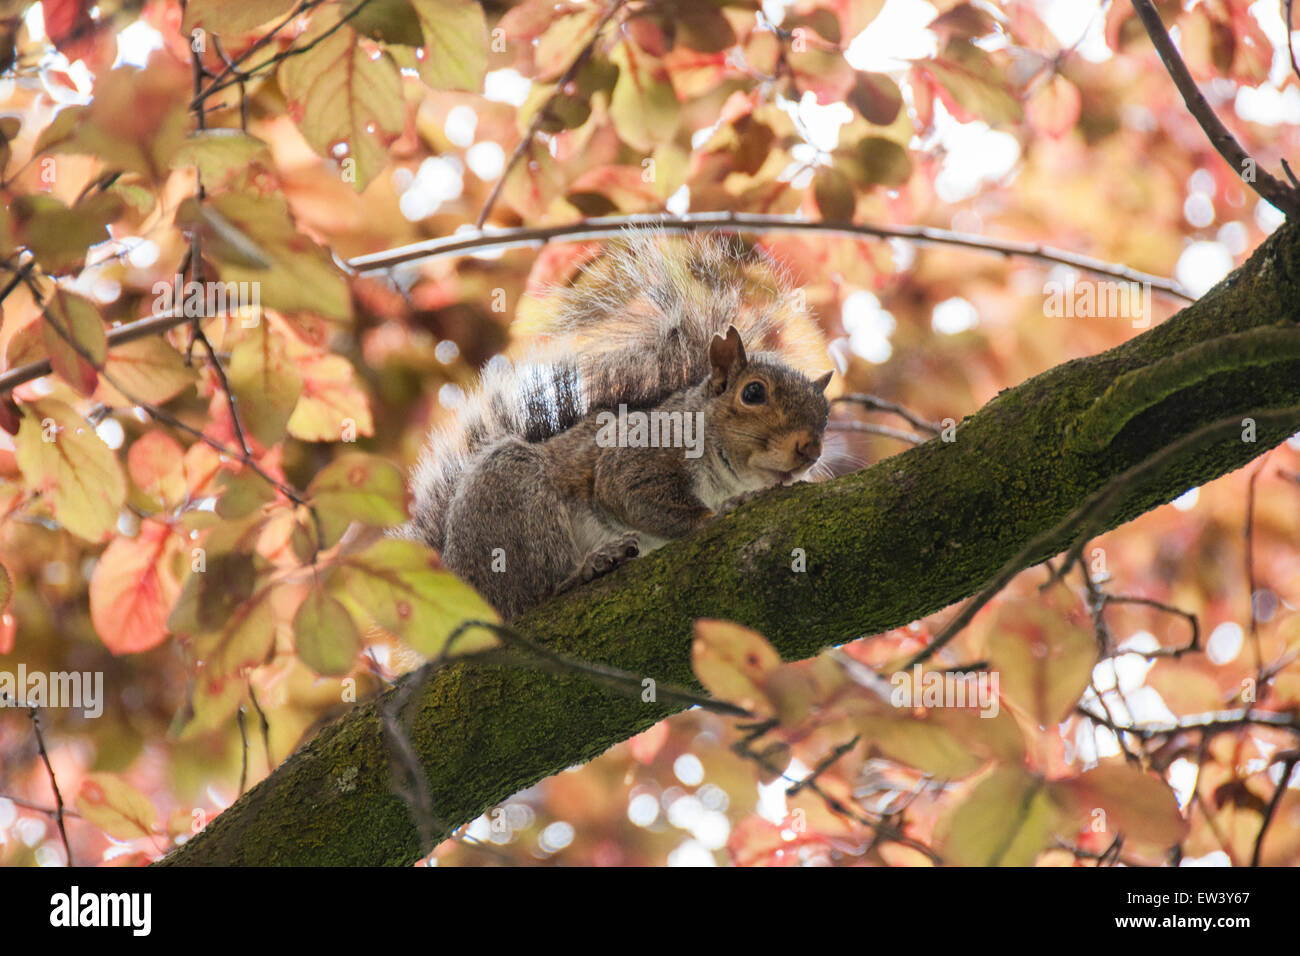 Eastern gray squirrel climbing in tree with autumn colors Stock Photo